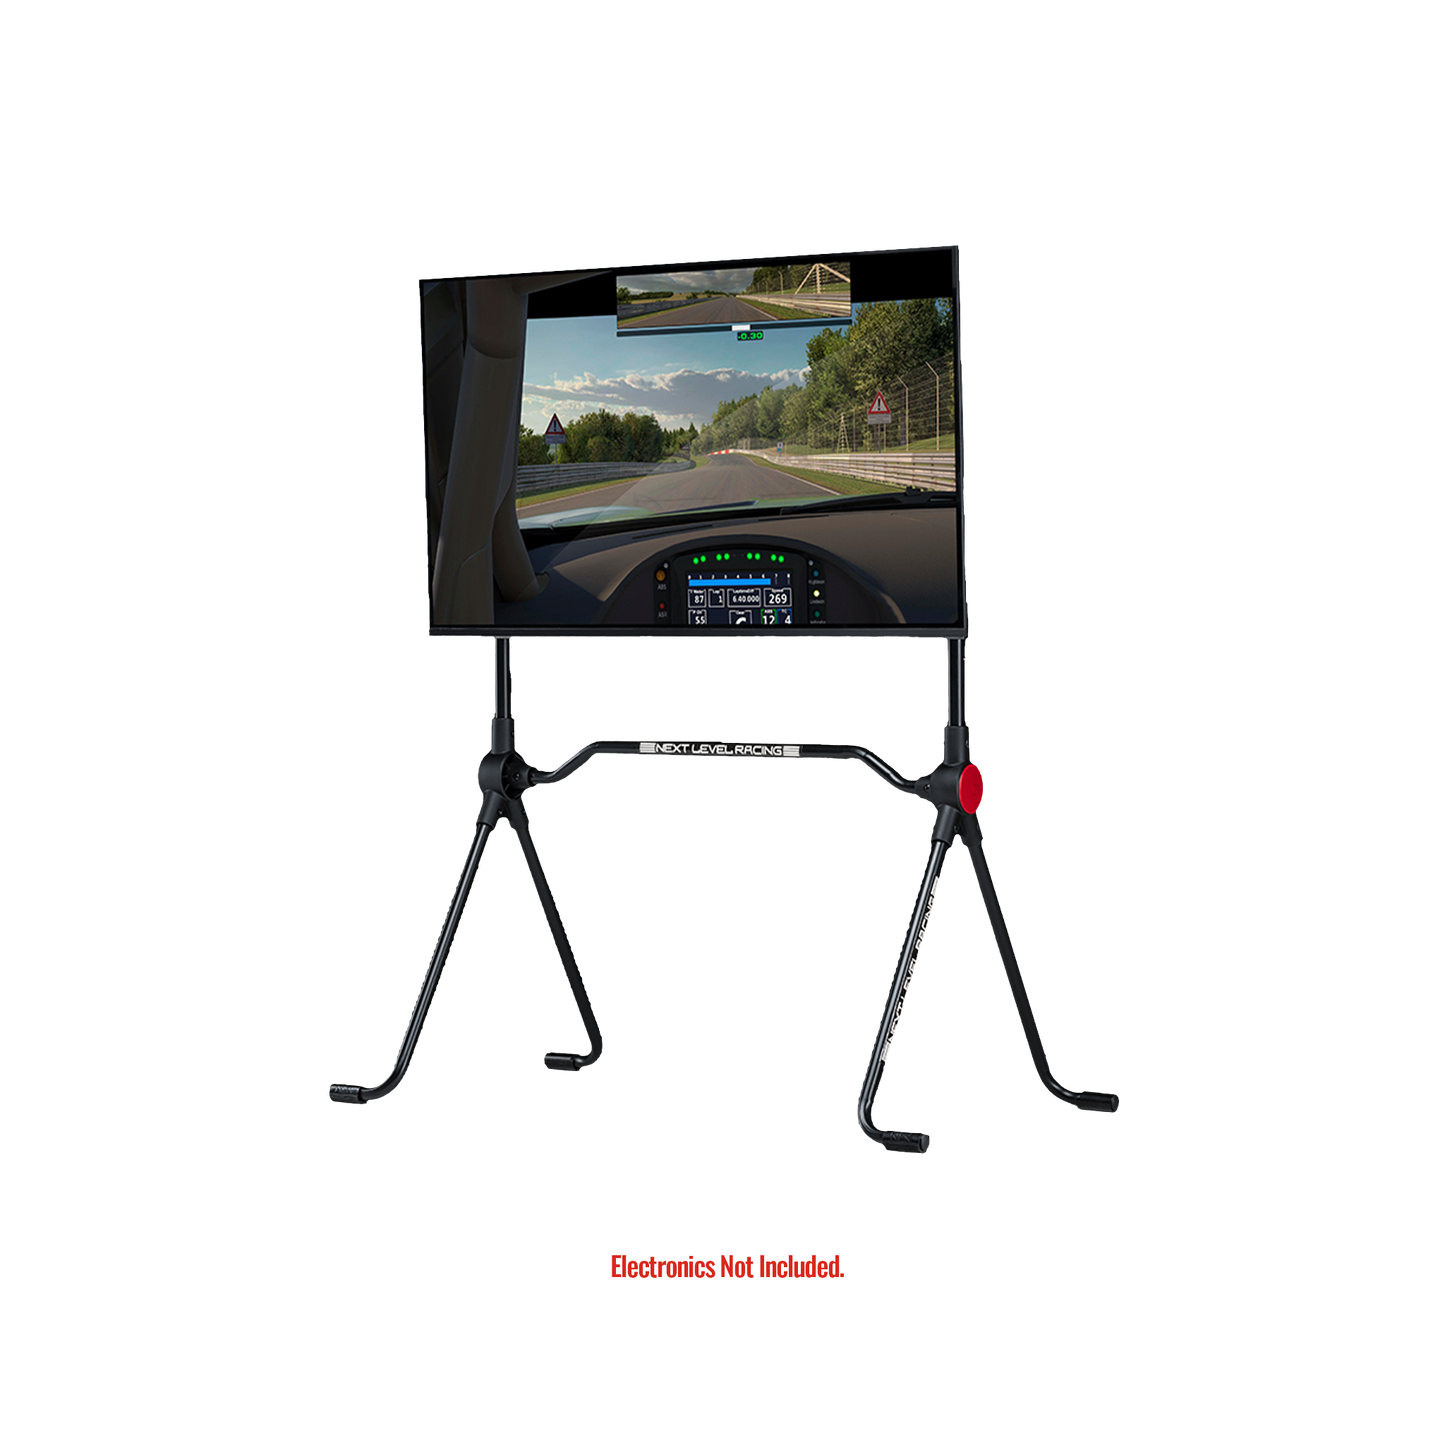 NEXT LEVEL RACING LITE FREE STANDING MONITOR STAND - SimMontreal